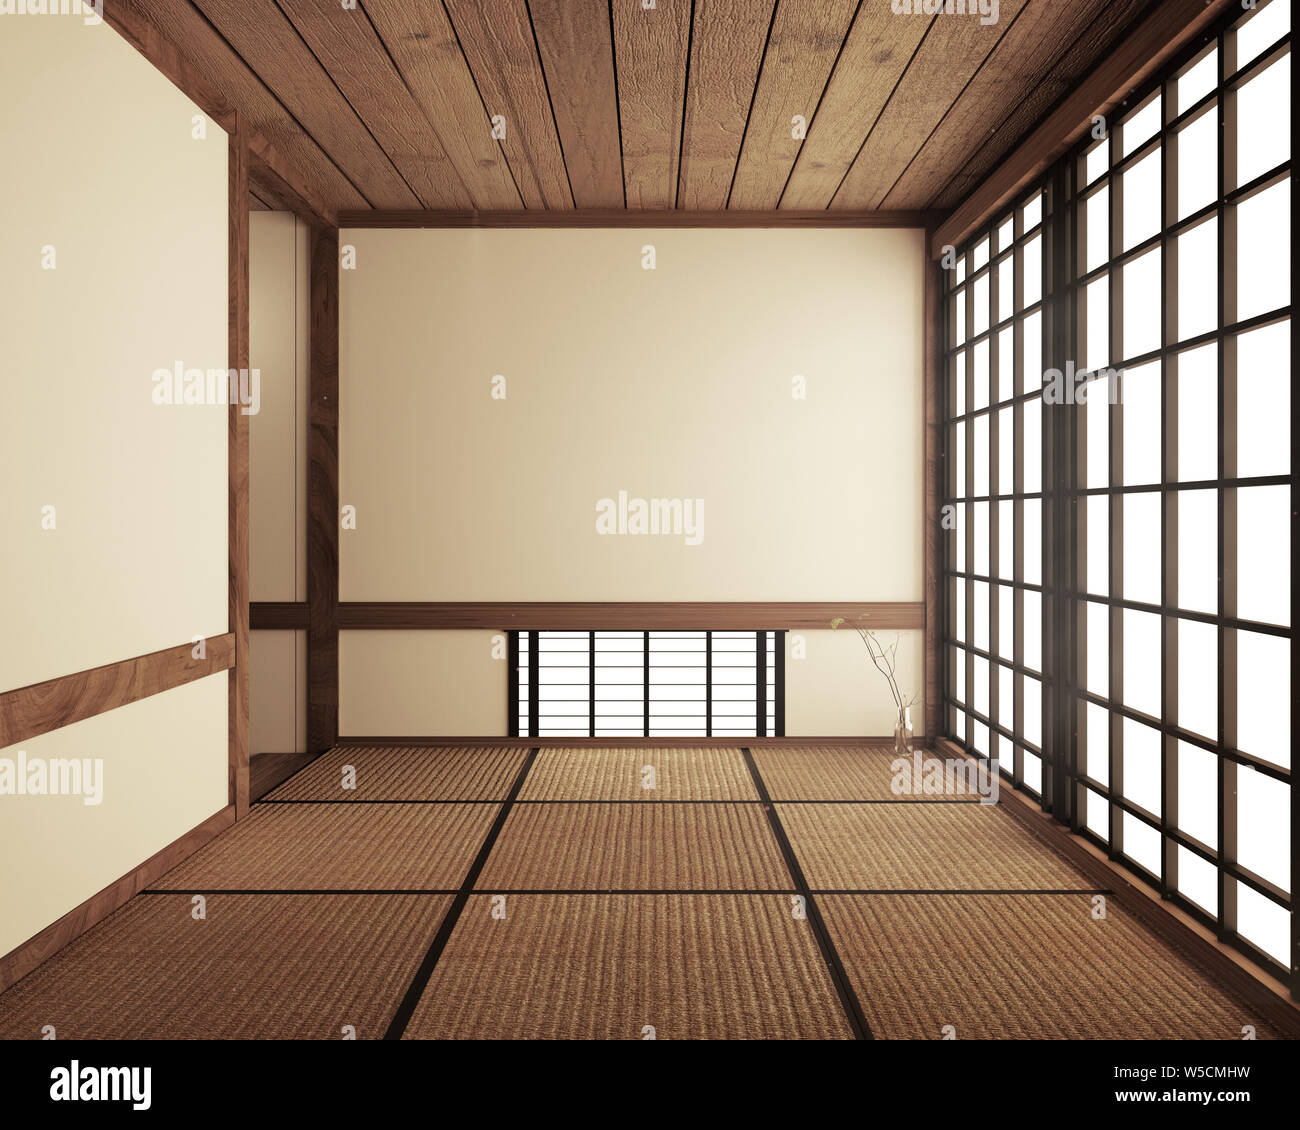 Designing the most beautiful Mock up, Designed specifically in Japanese style, empty room. 3D rendering Stock Photo